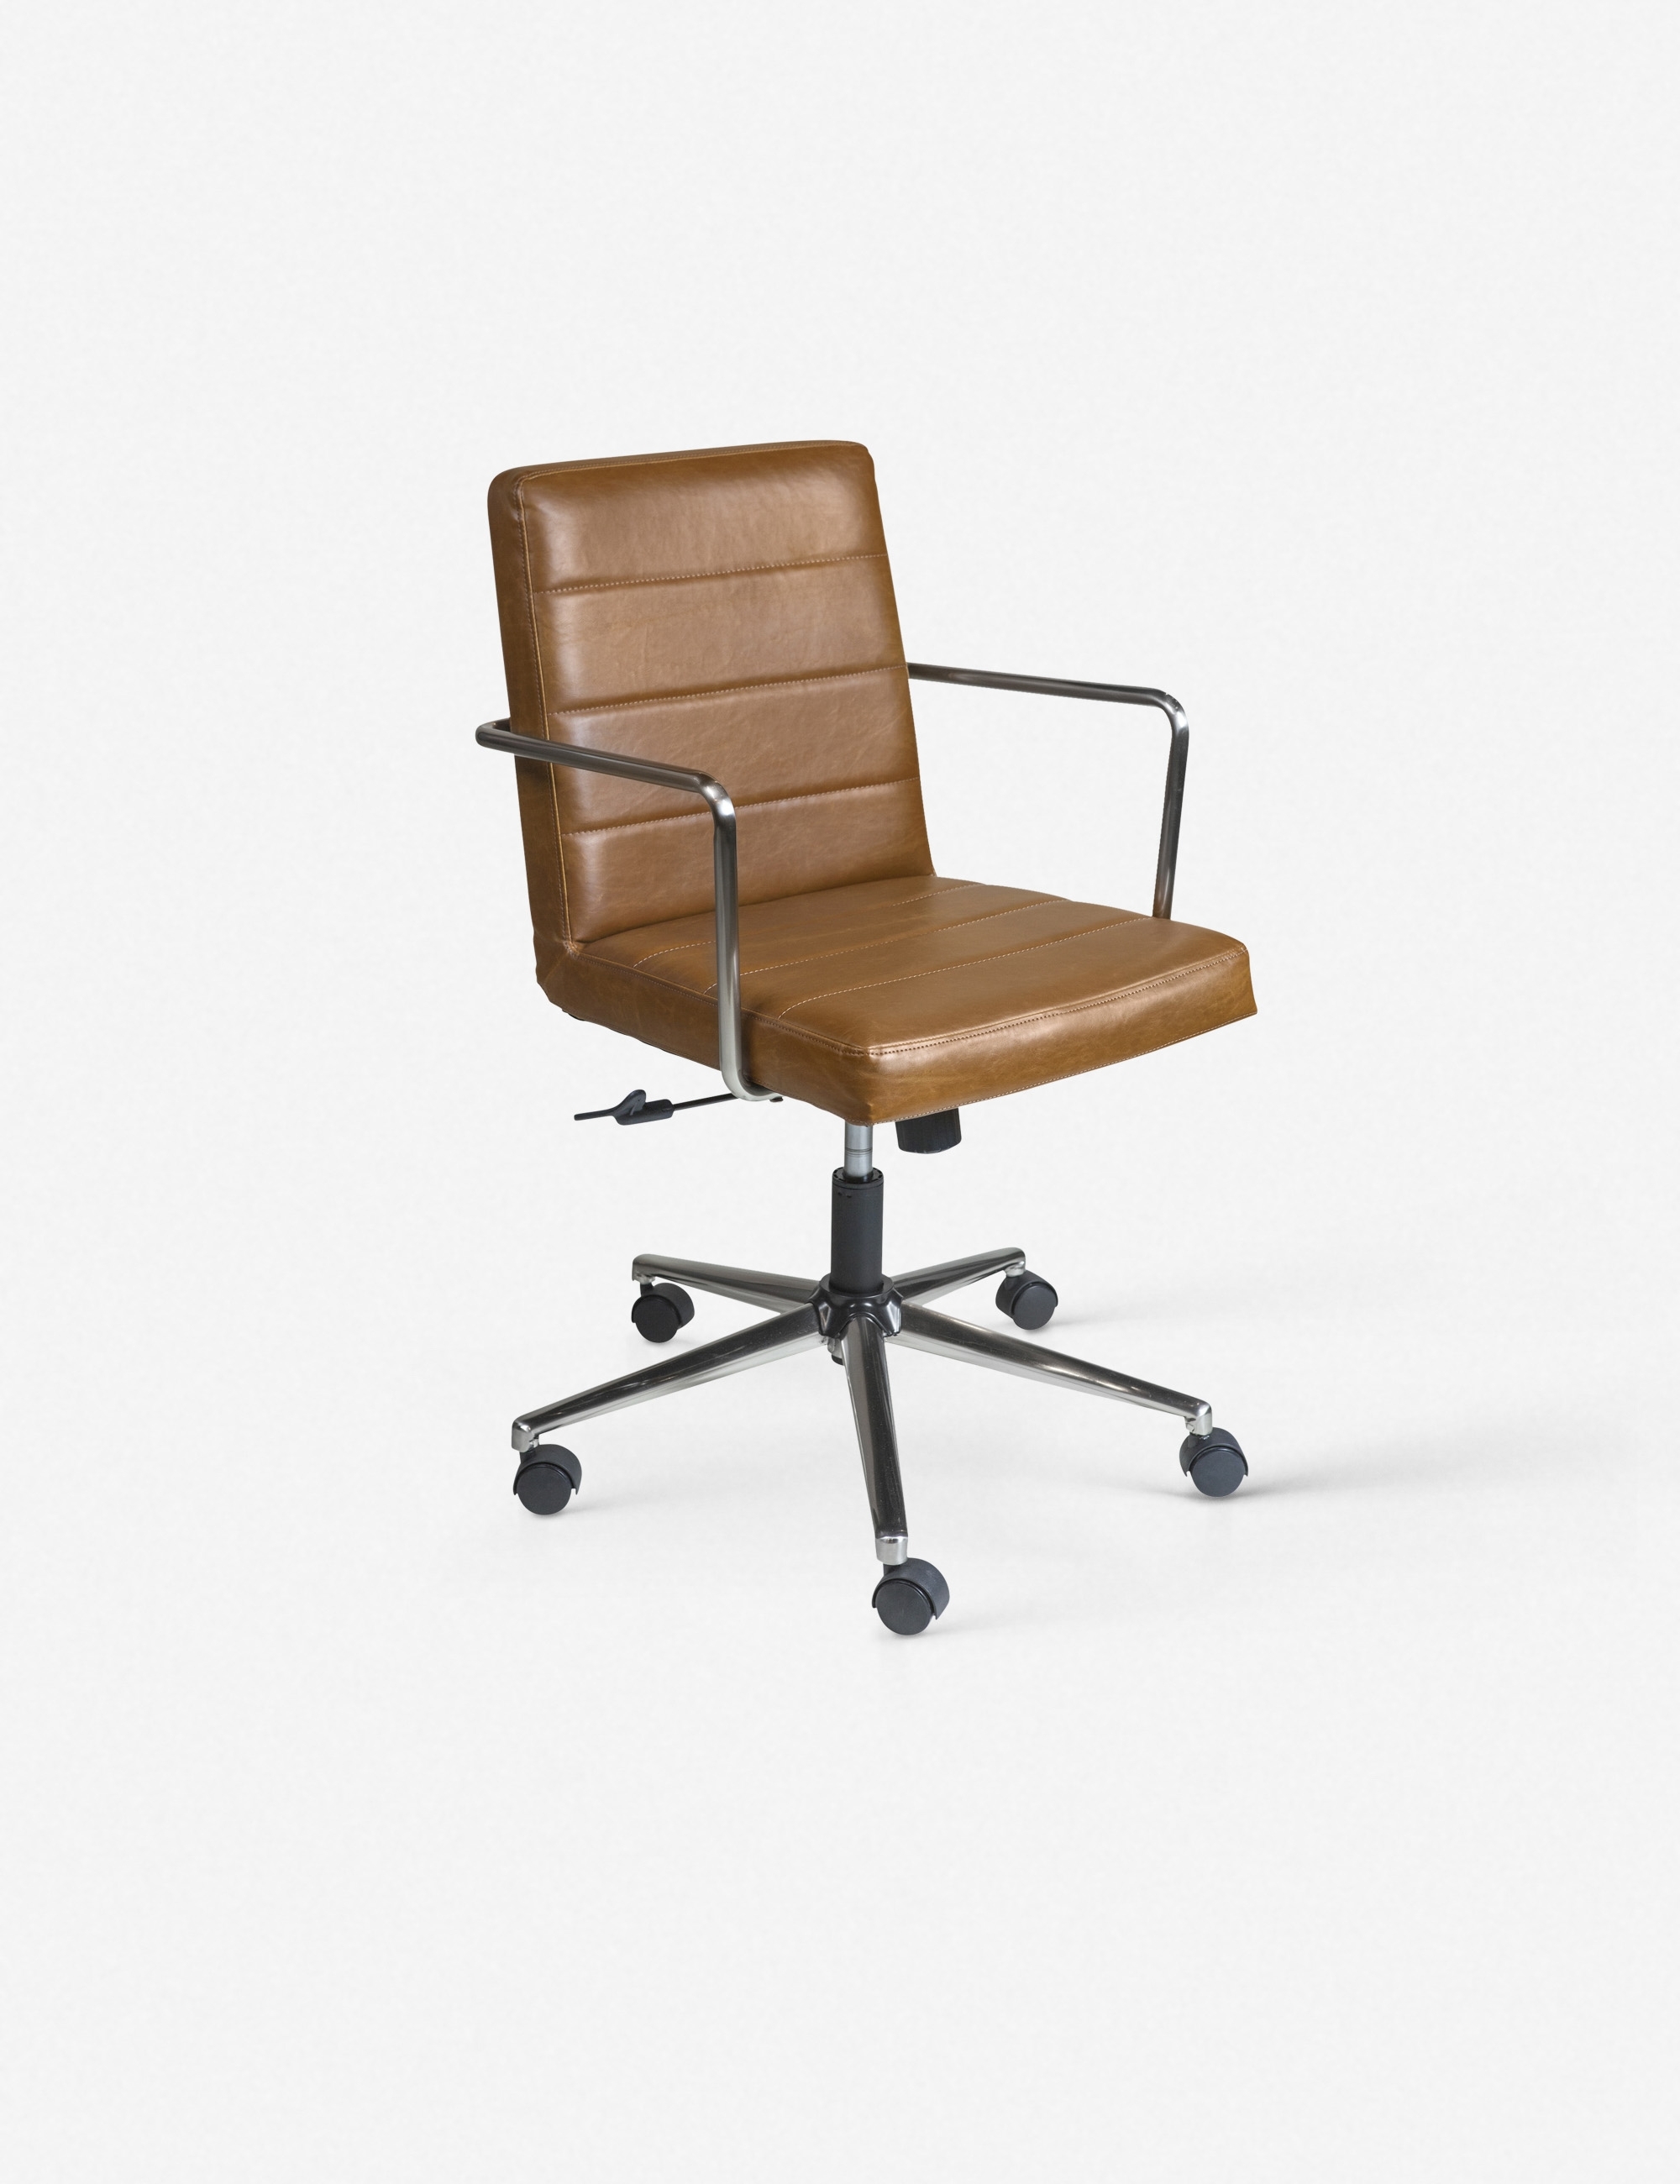 crate and barrel graham leather desk chair